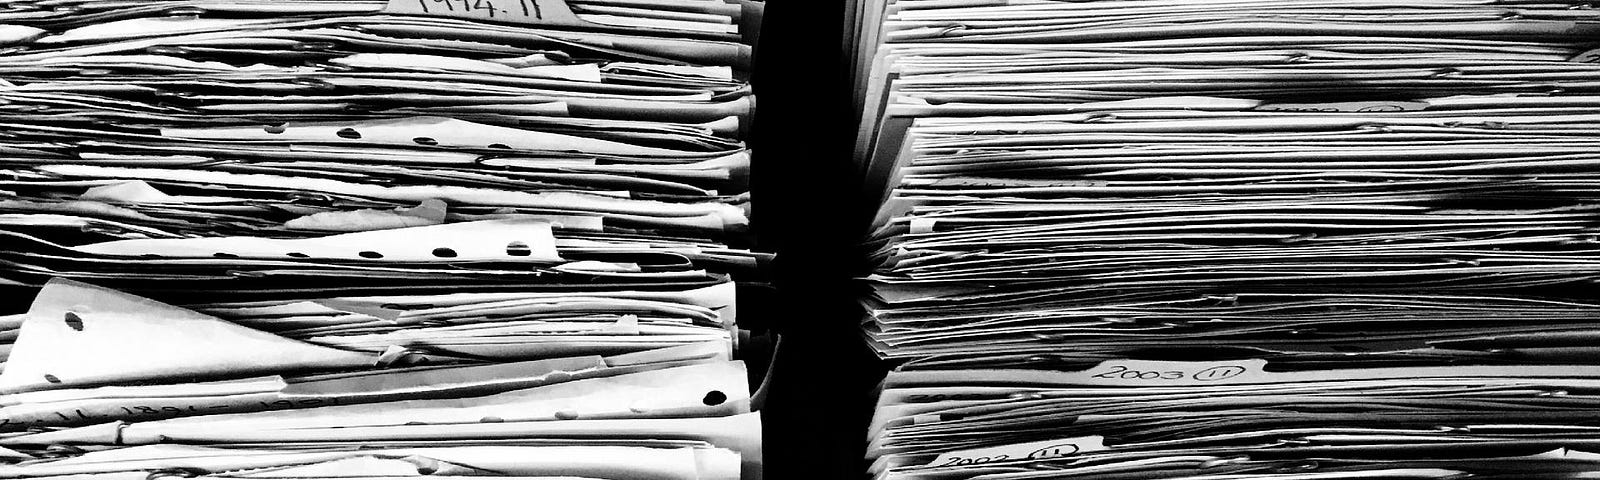 Stack of files and paperwork